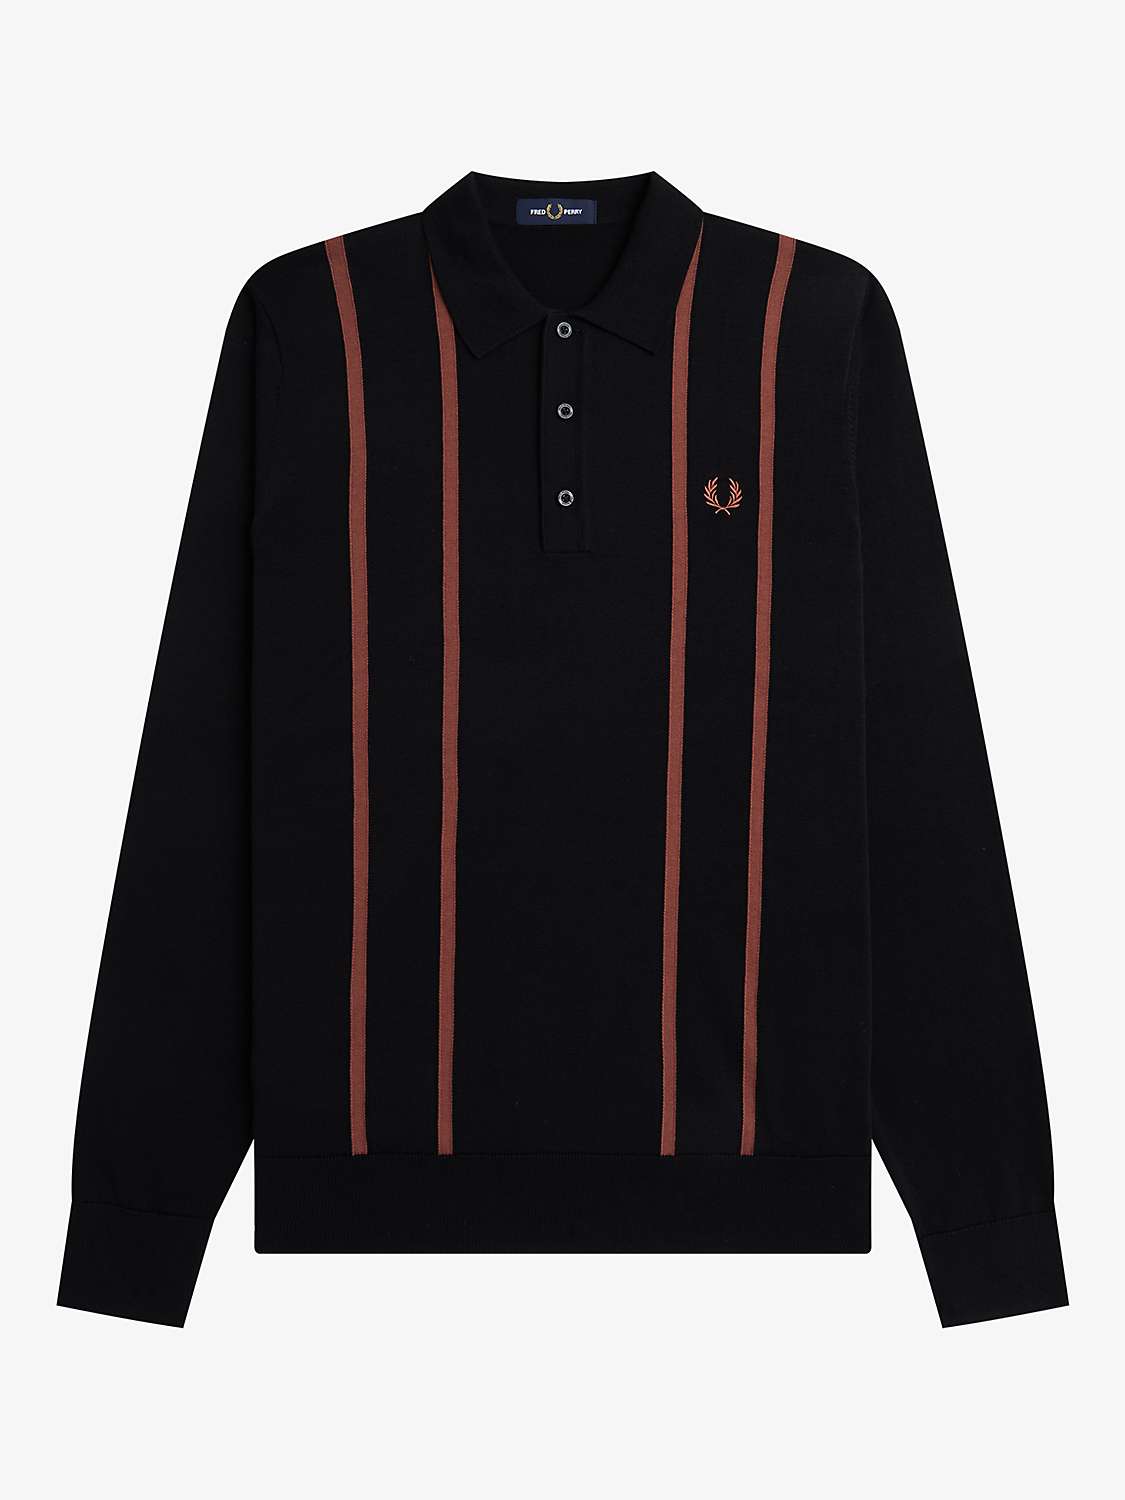 Buy Fred Perry Textured Knit Long Sleeve Polo Shirt, Black/Red Online at johnlewis.com